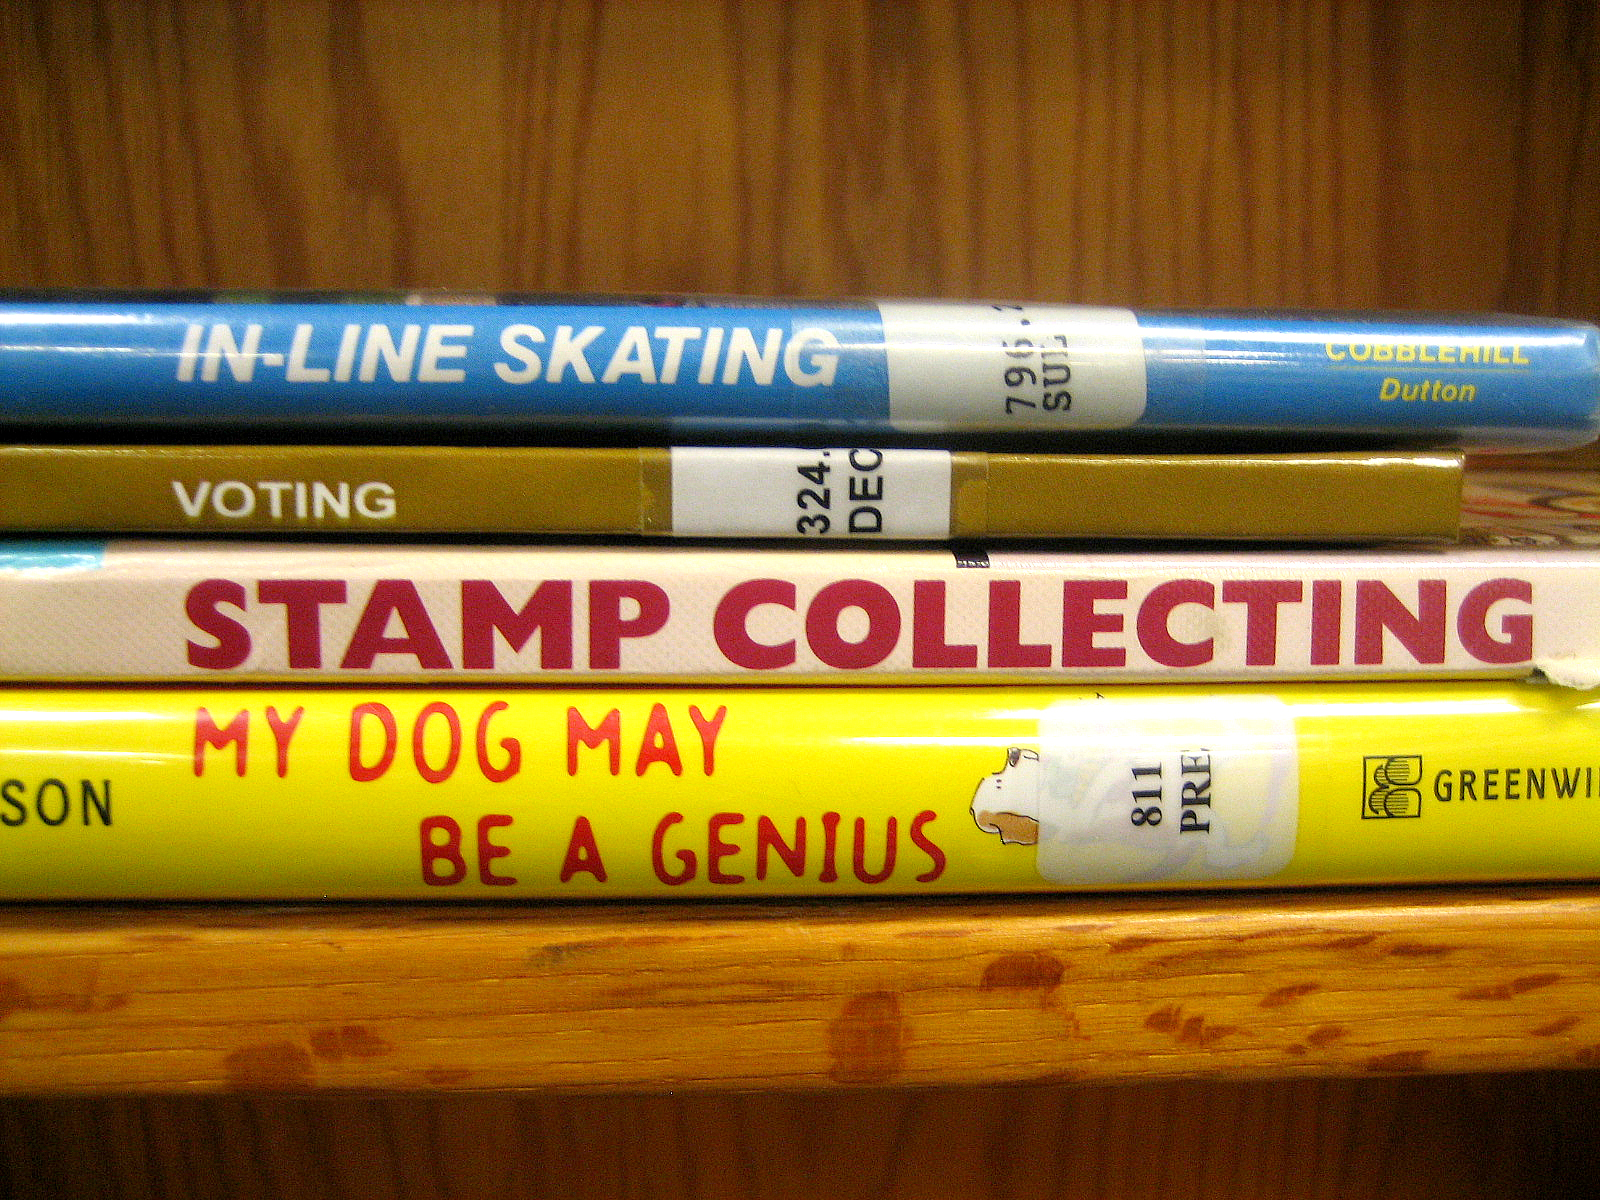 Get Ready for National Poetry Month by Making Book Spine Poems!